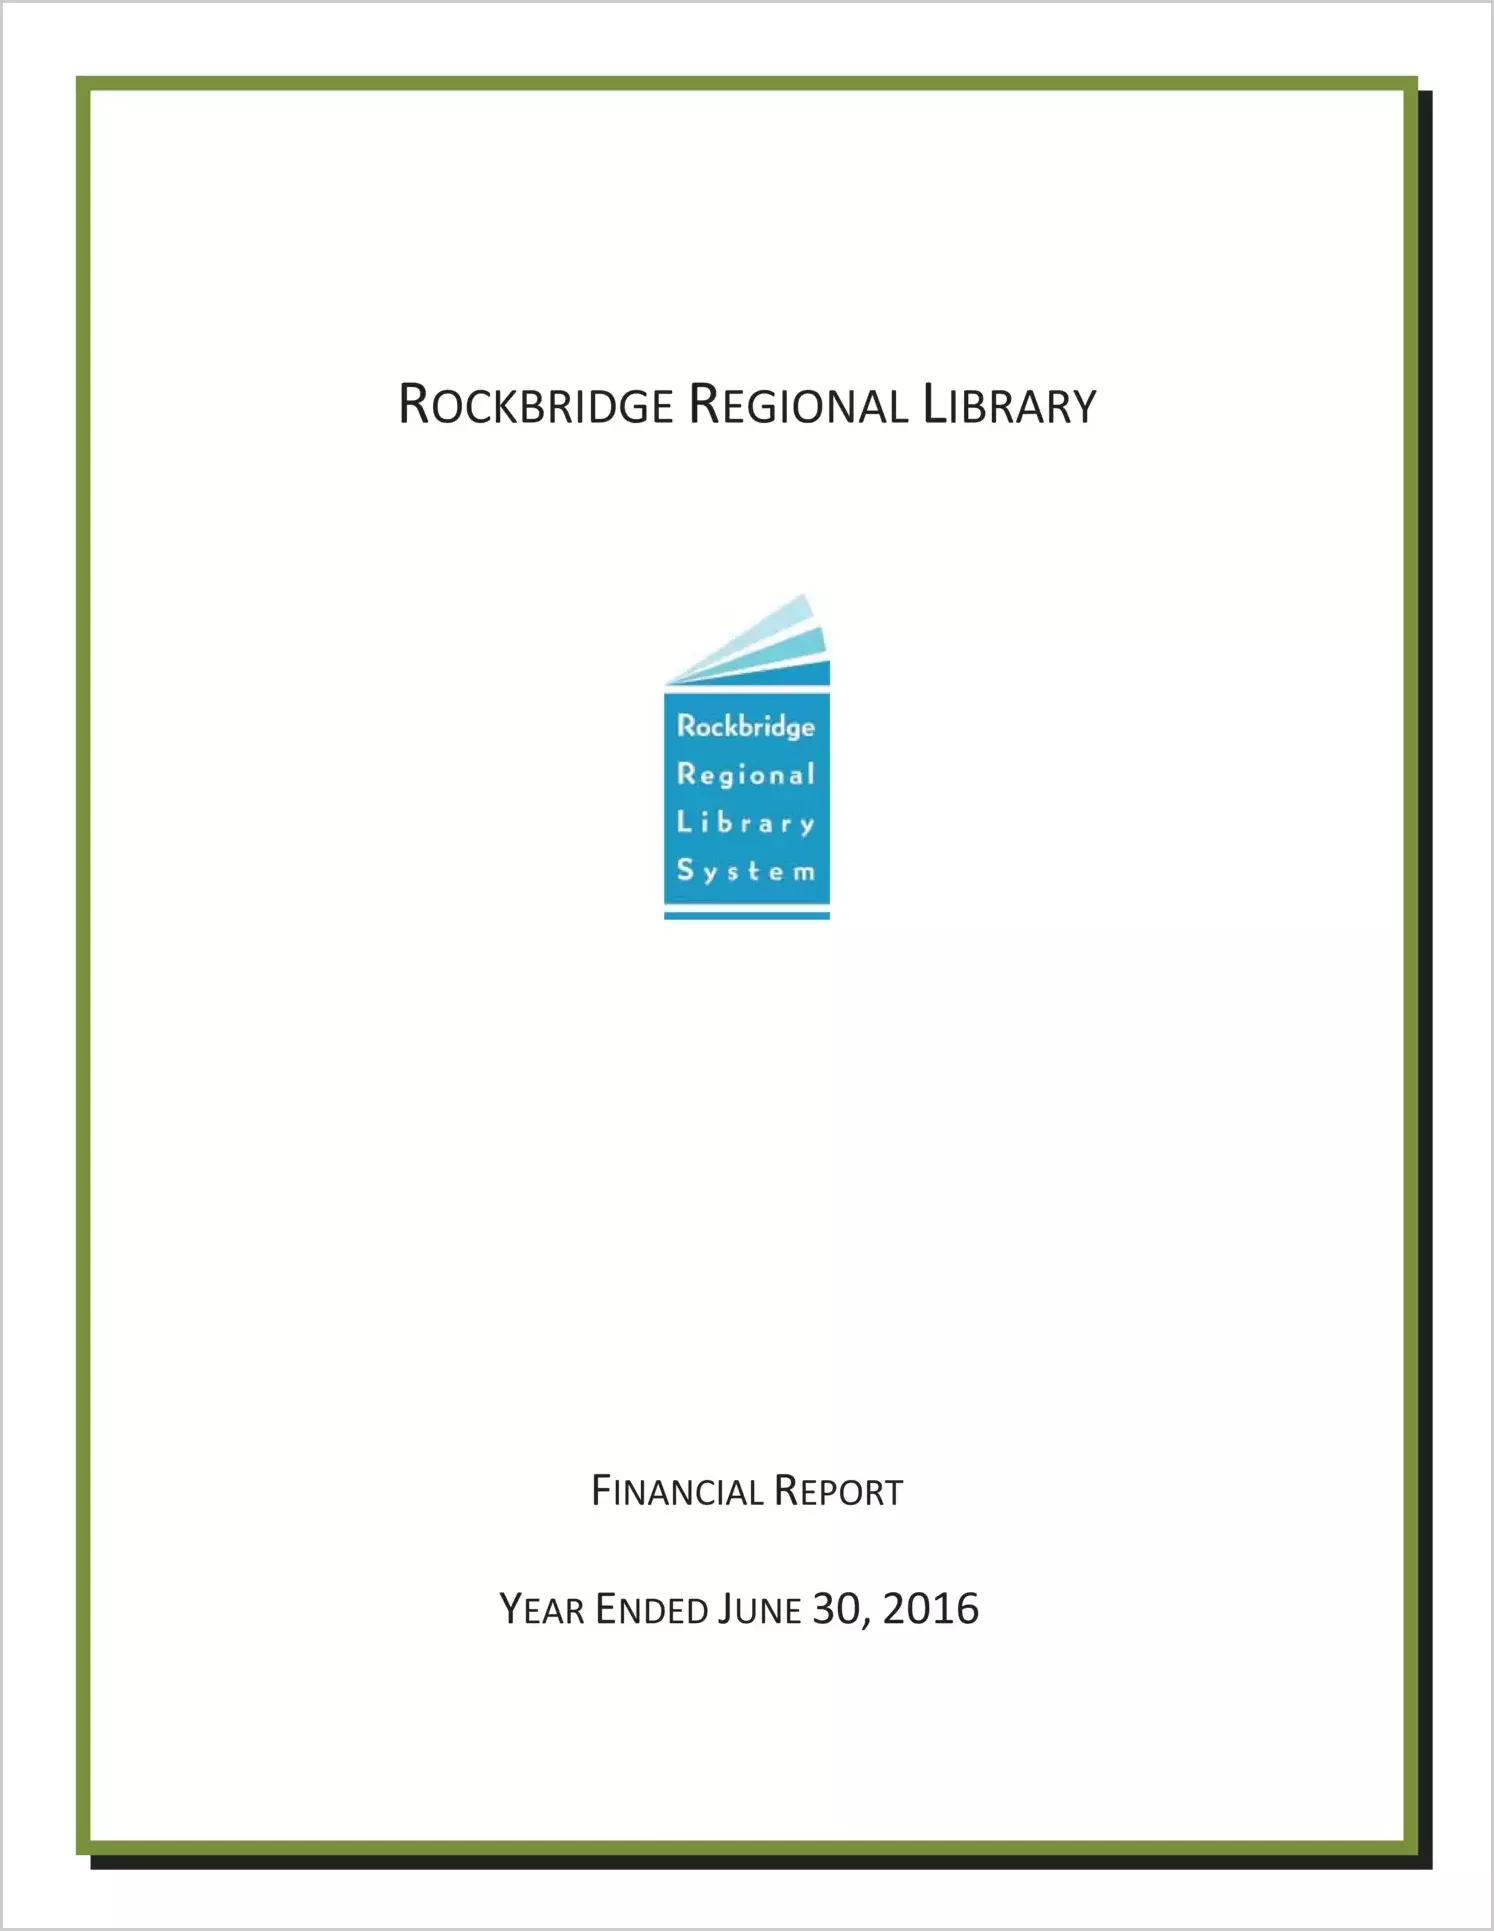 2016 ABC/Other Annual Financial Report  for Rockbridge Regional Library